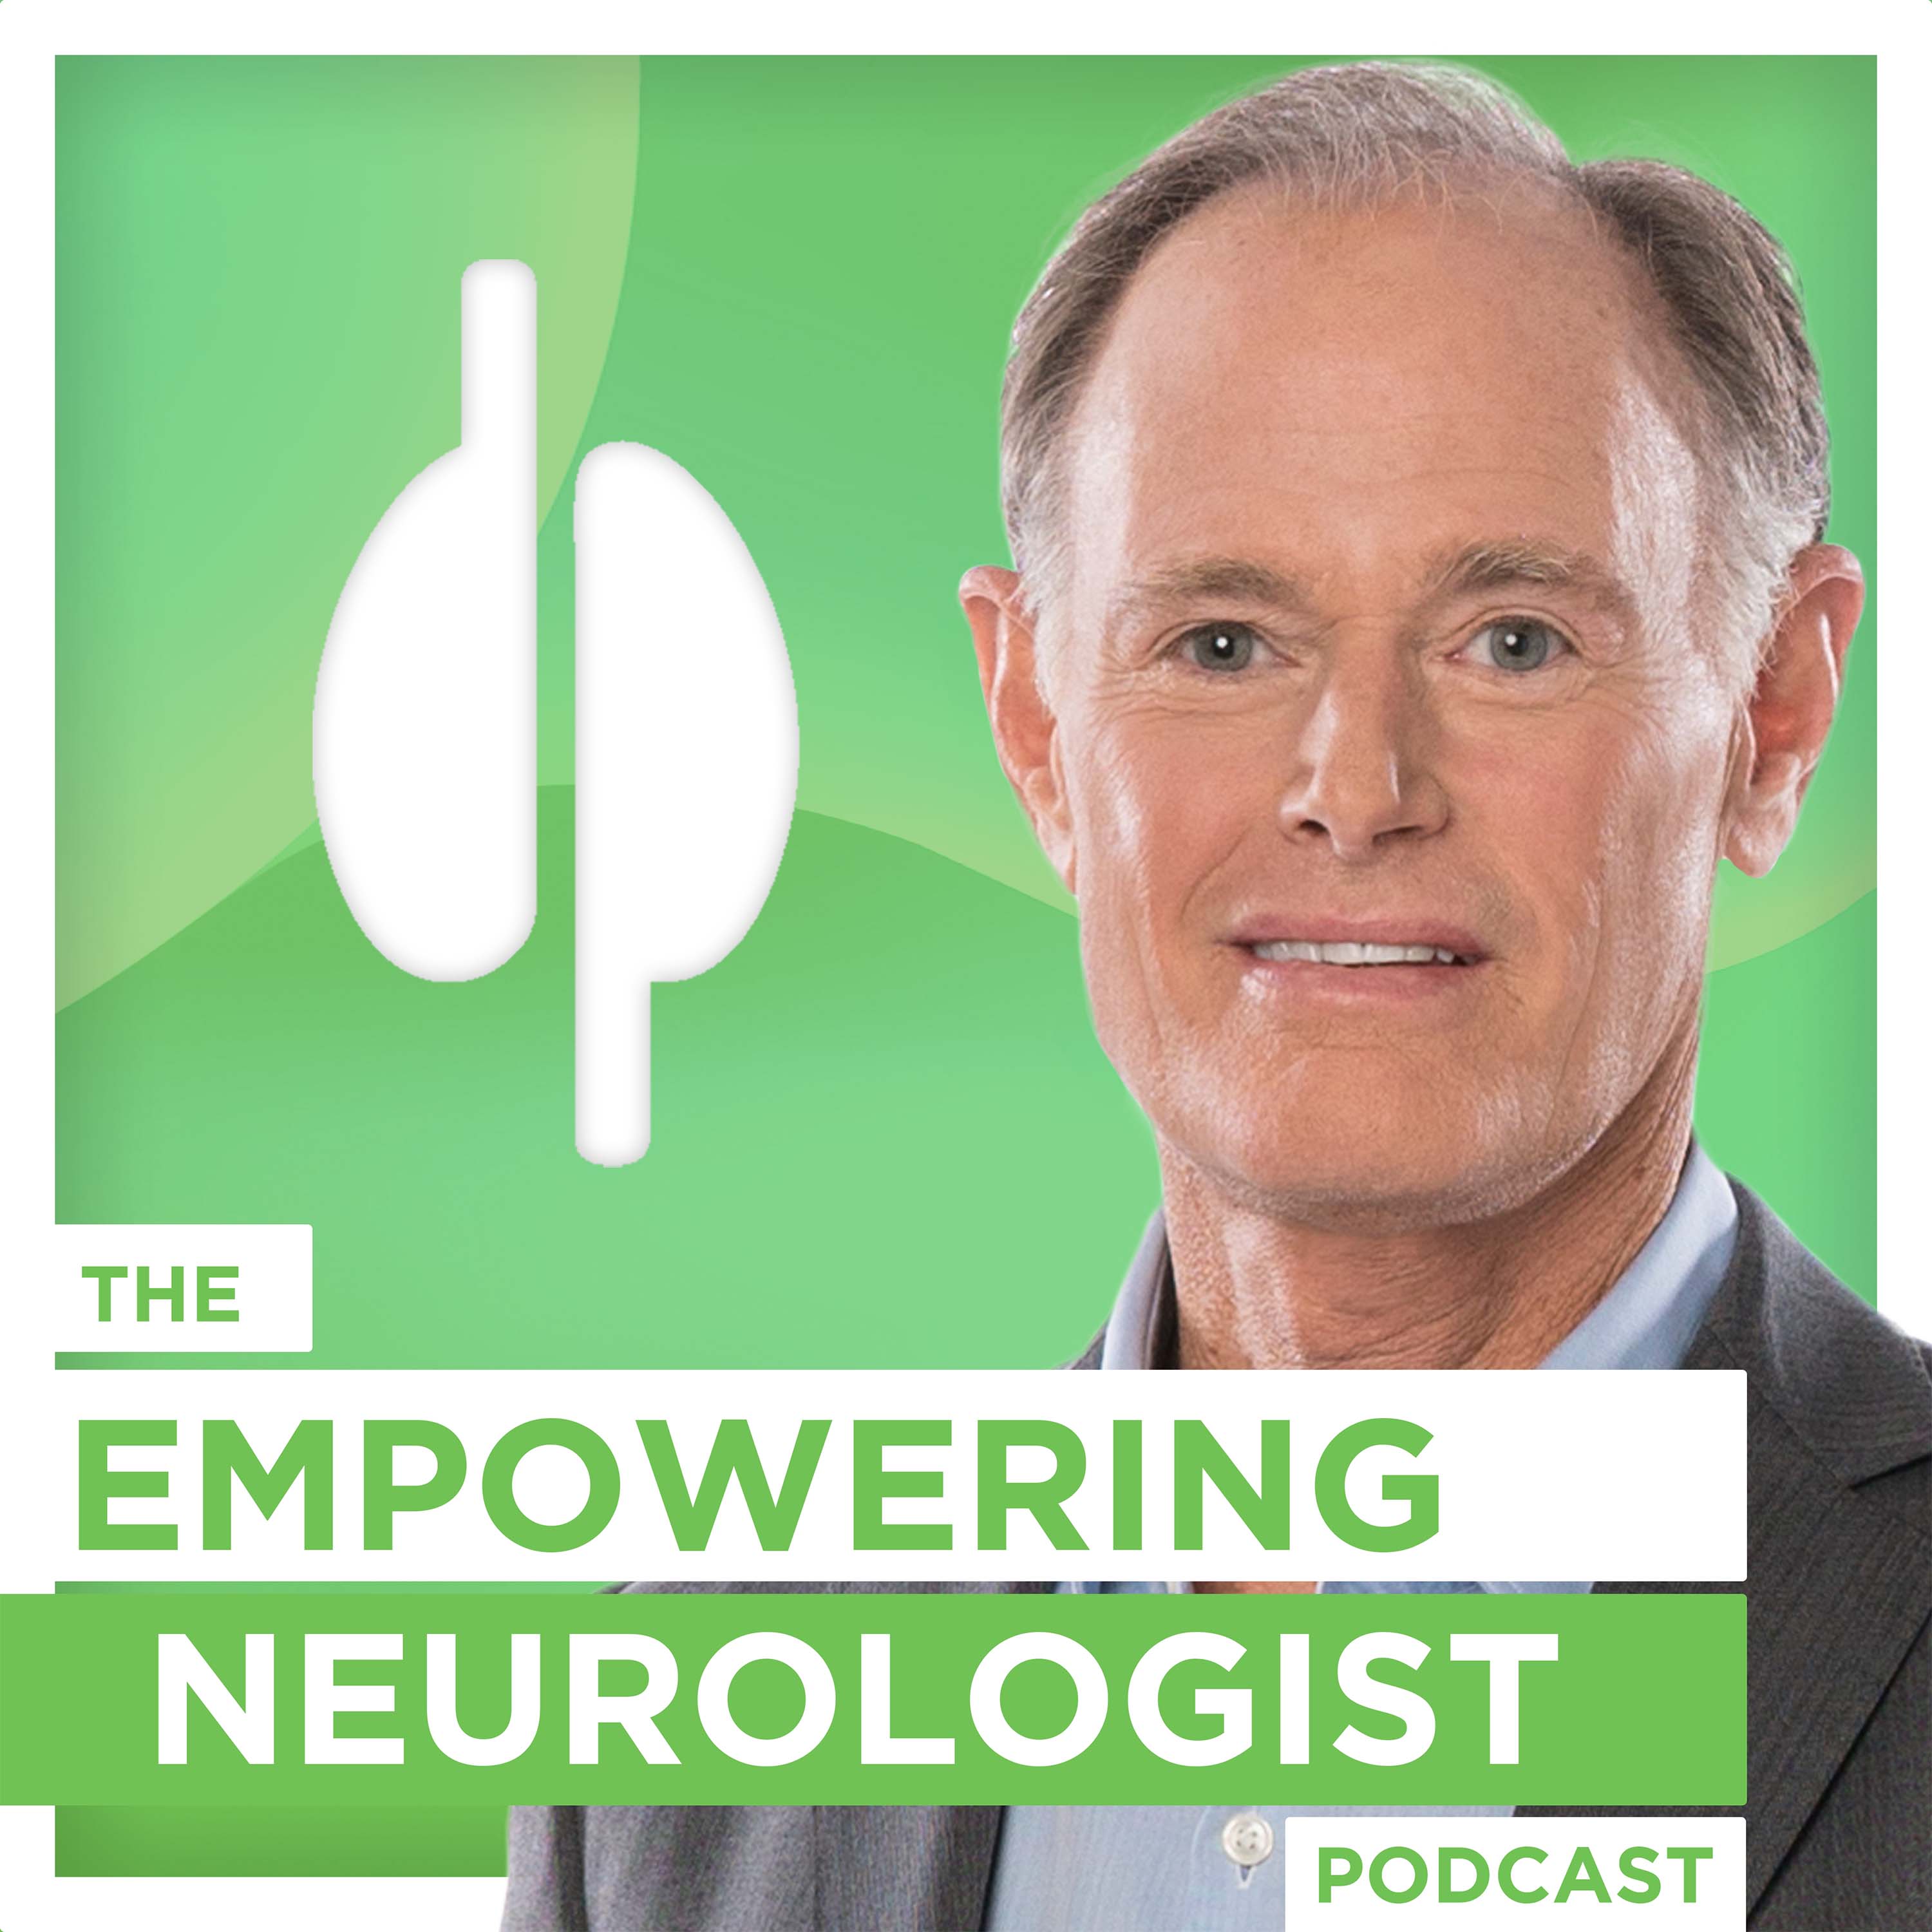 Long COVID Protocols and New Horizons - with Dr. James Jackson | The Empowering Neurologist EP. 165